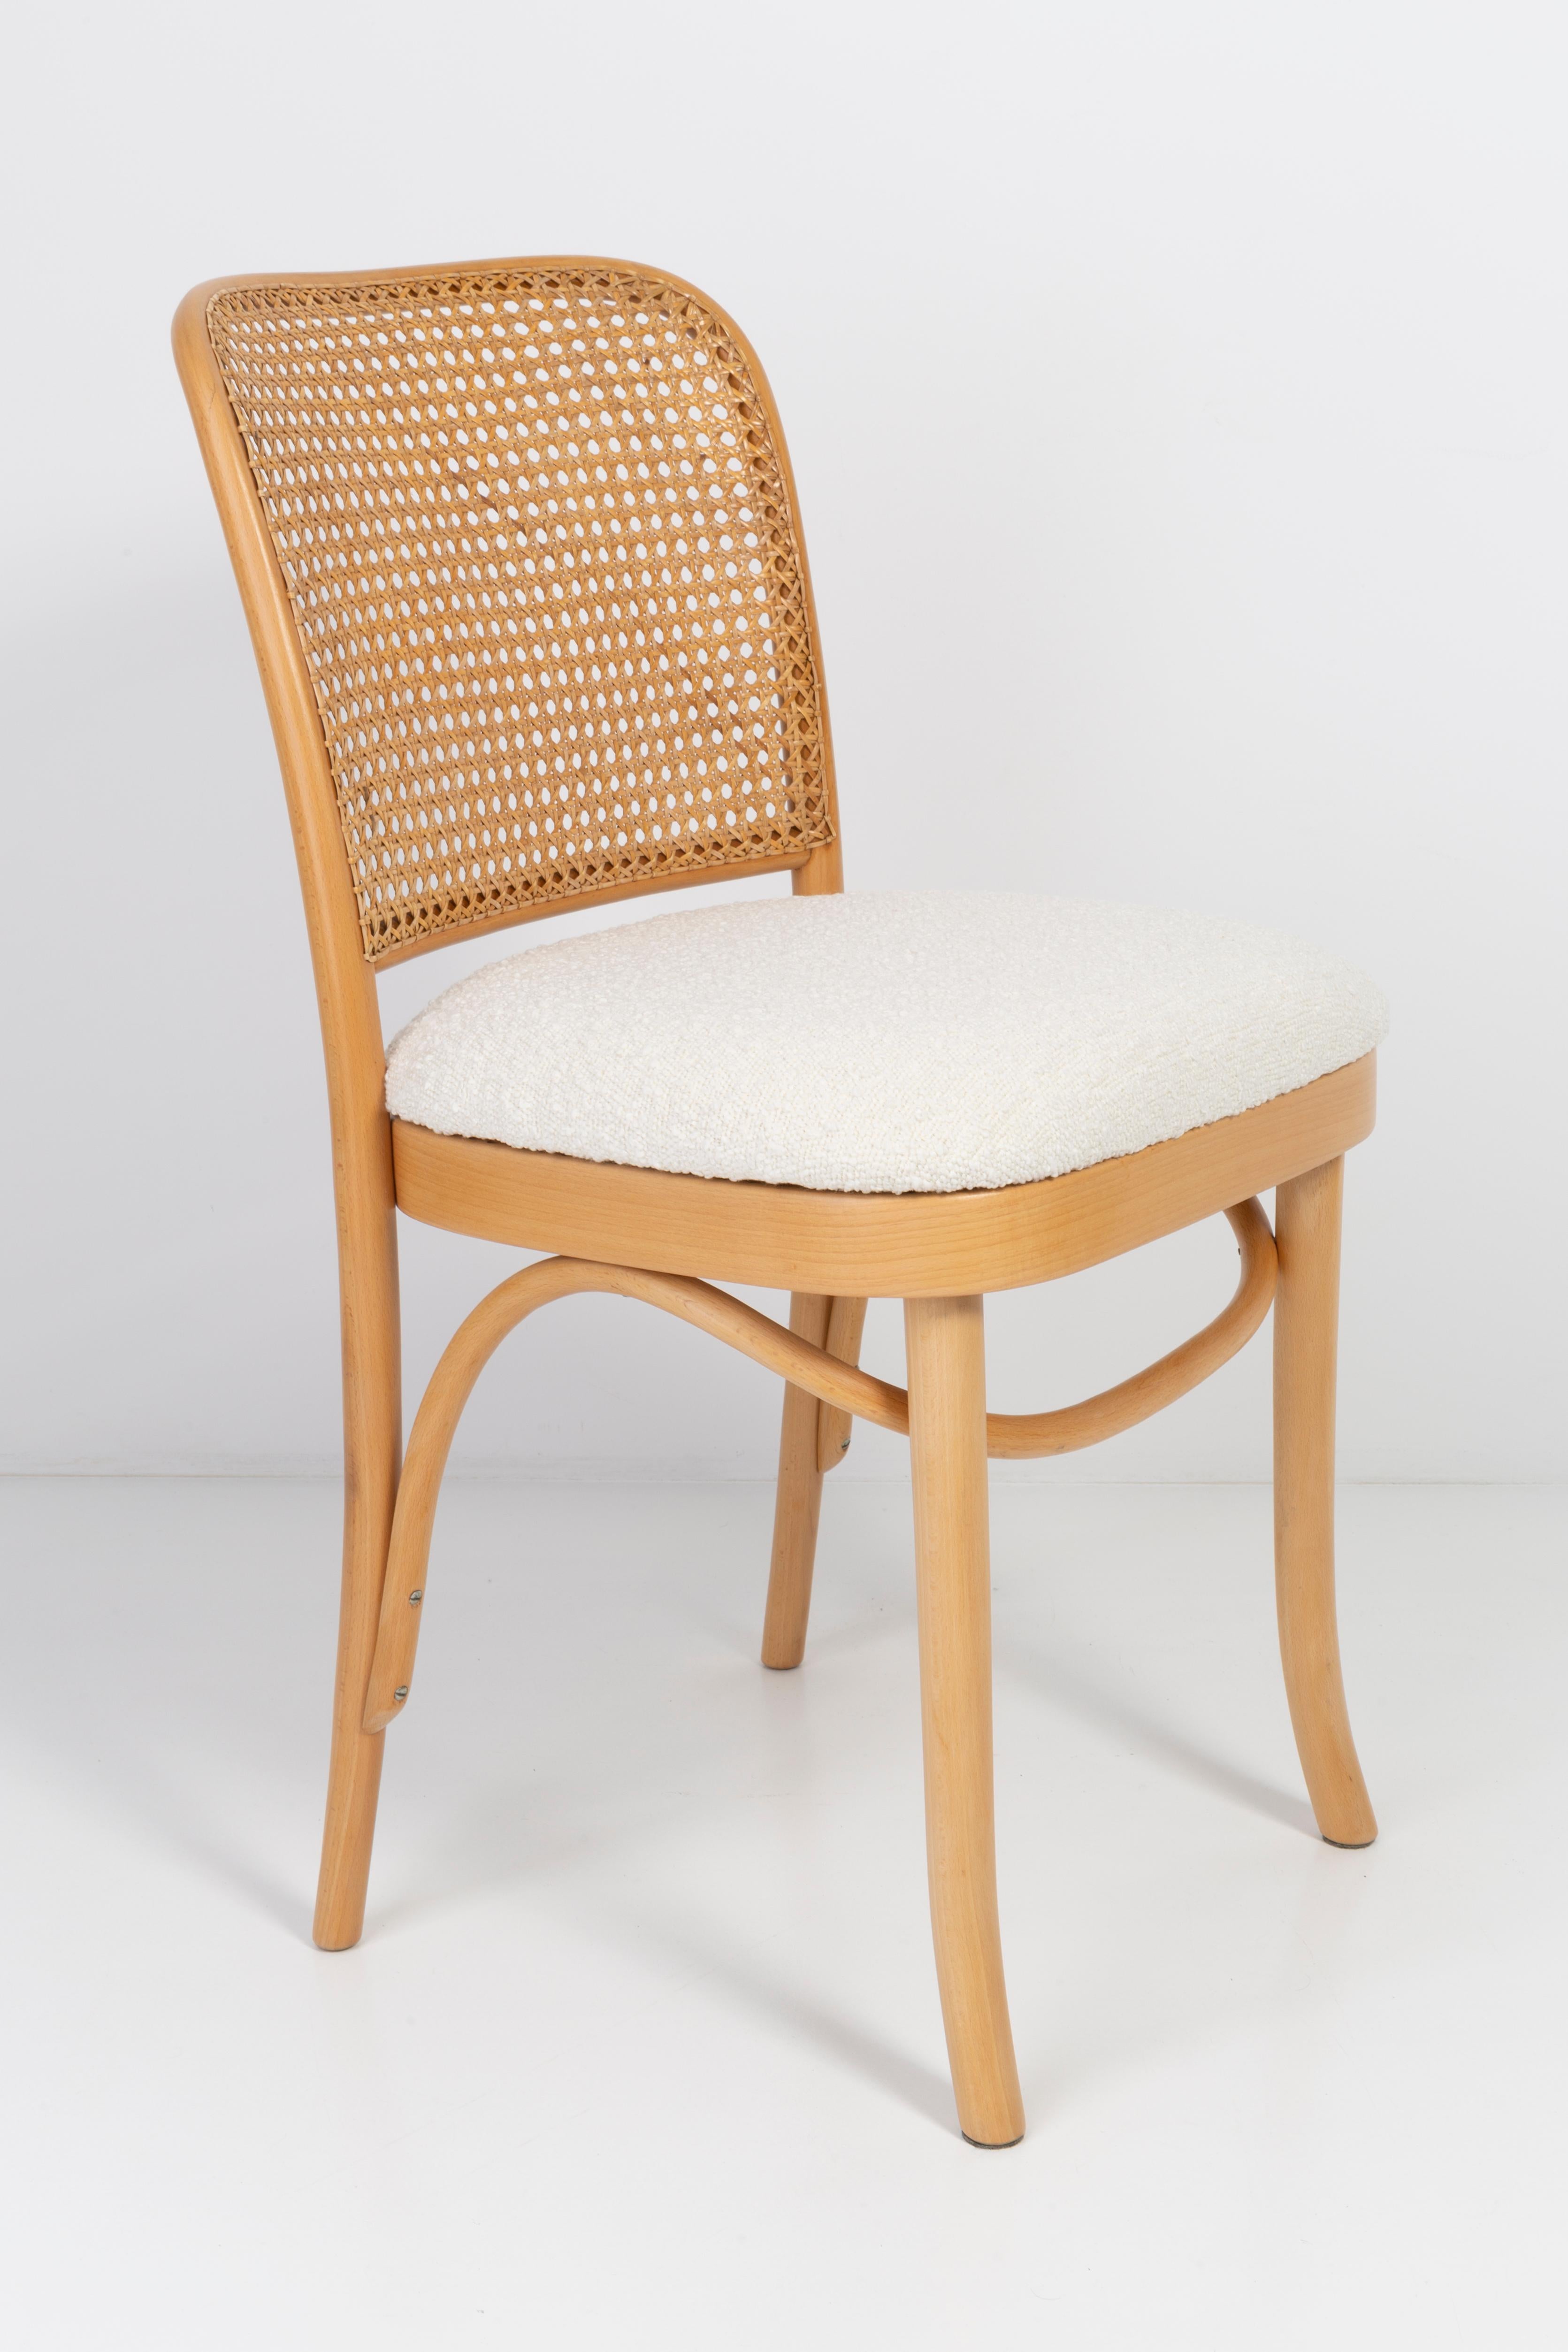 Light White Boucle Thonet Wood Rattan Chair, 1960s For Sale 3